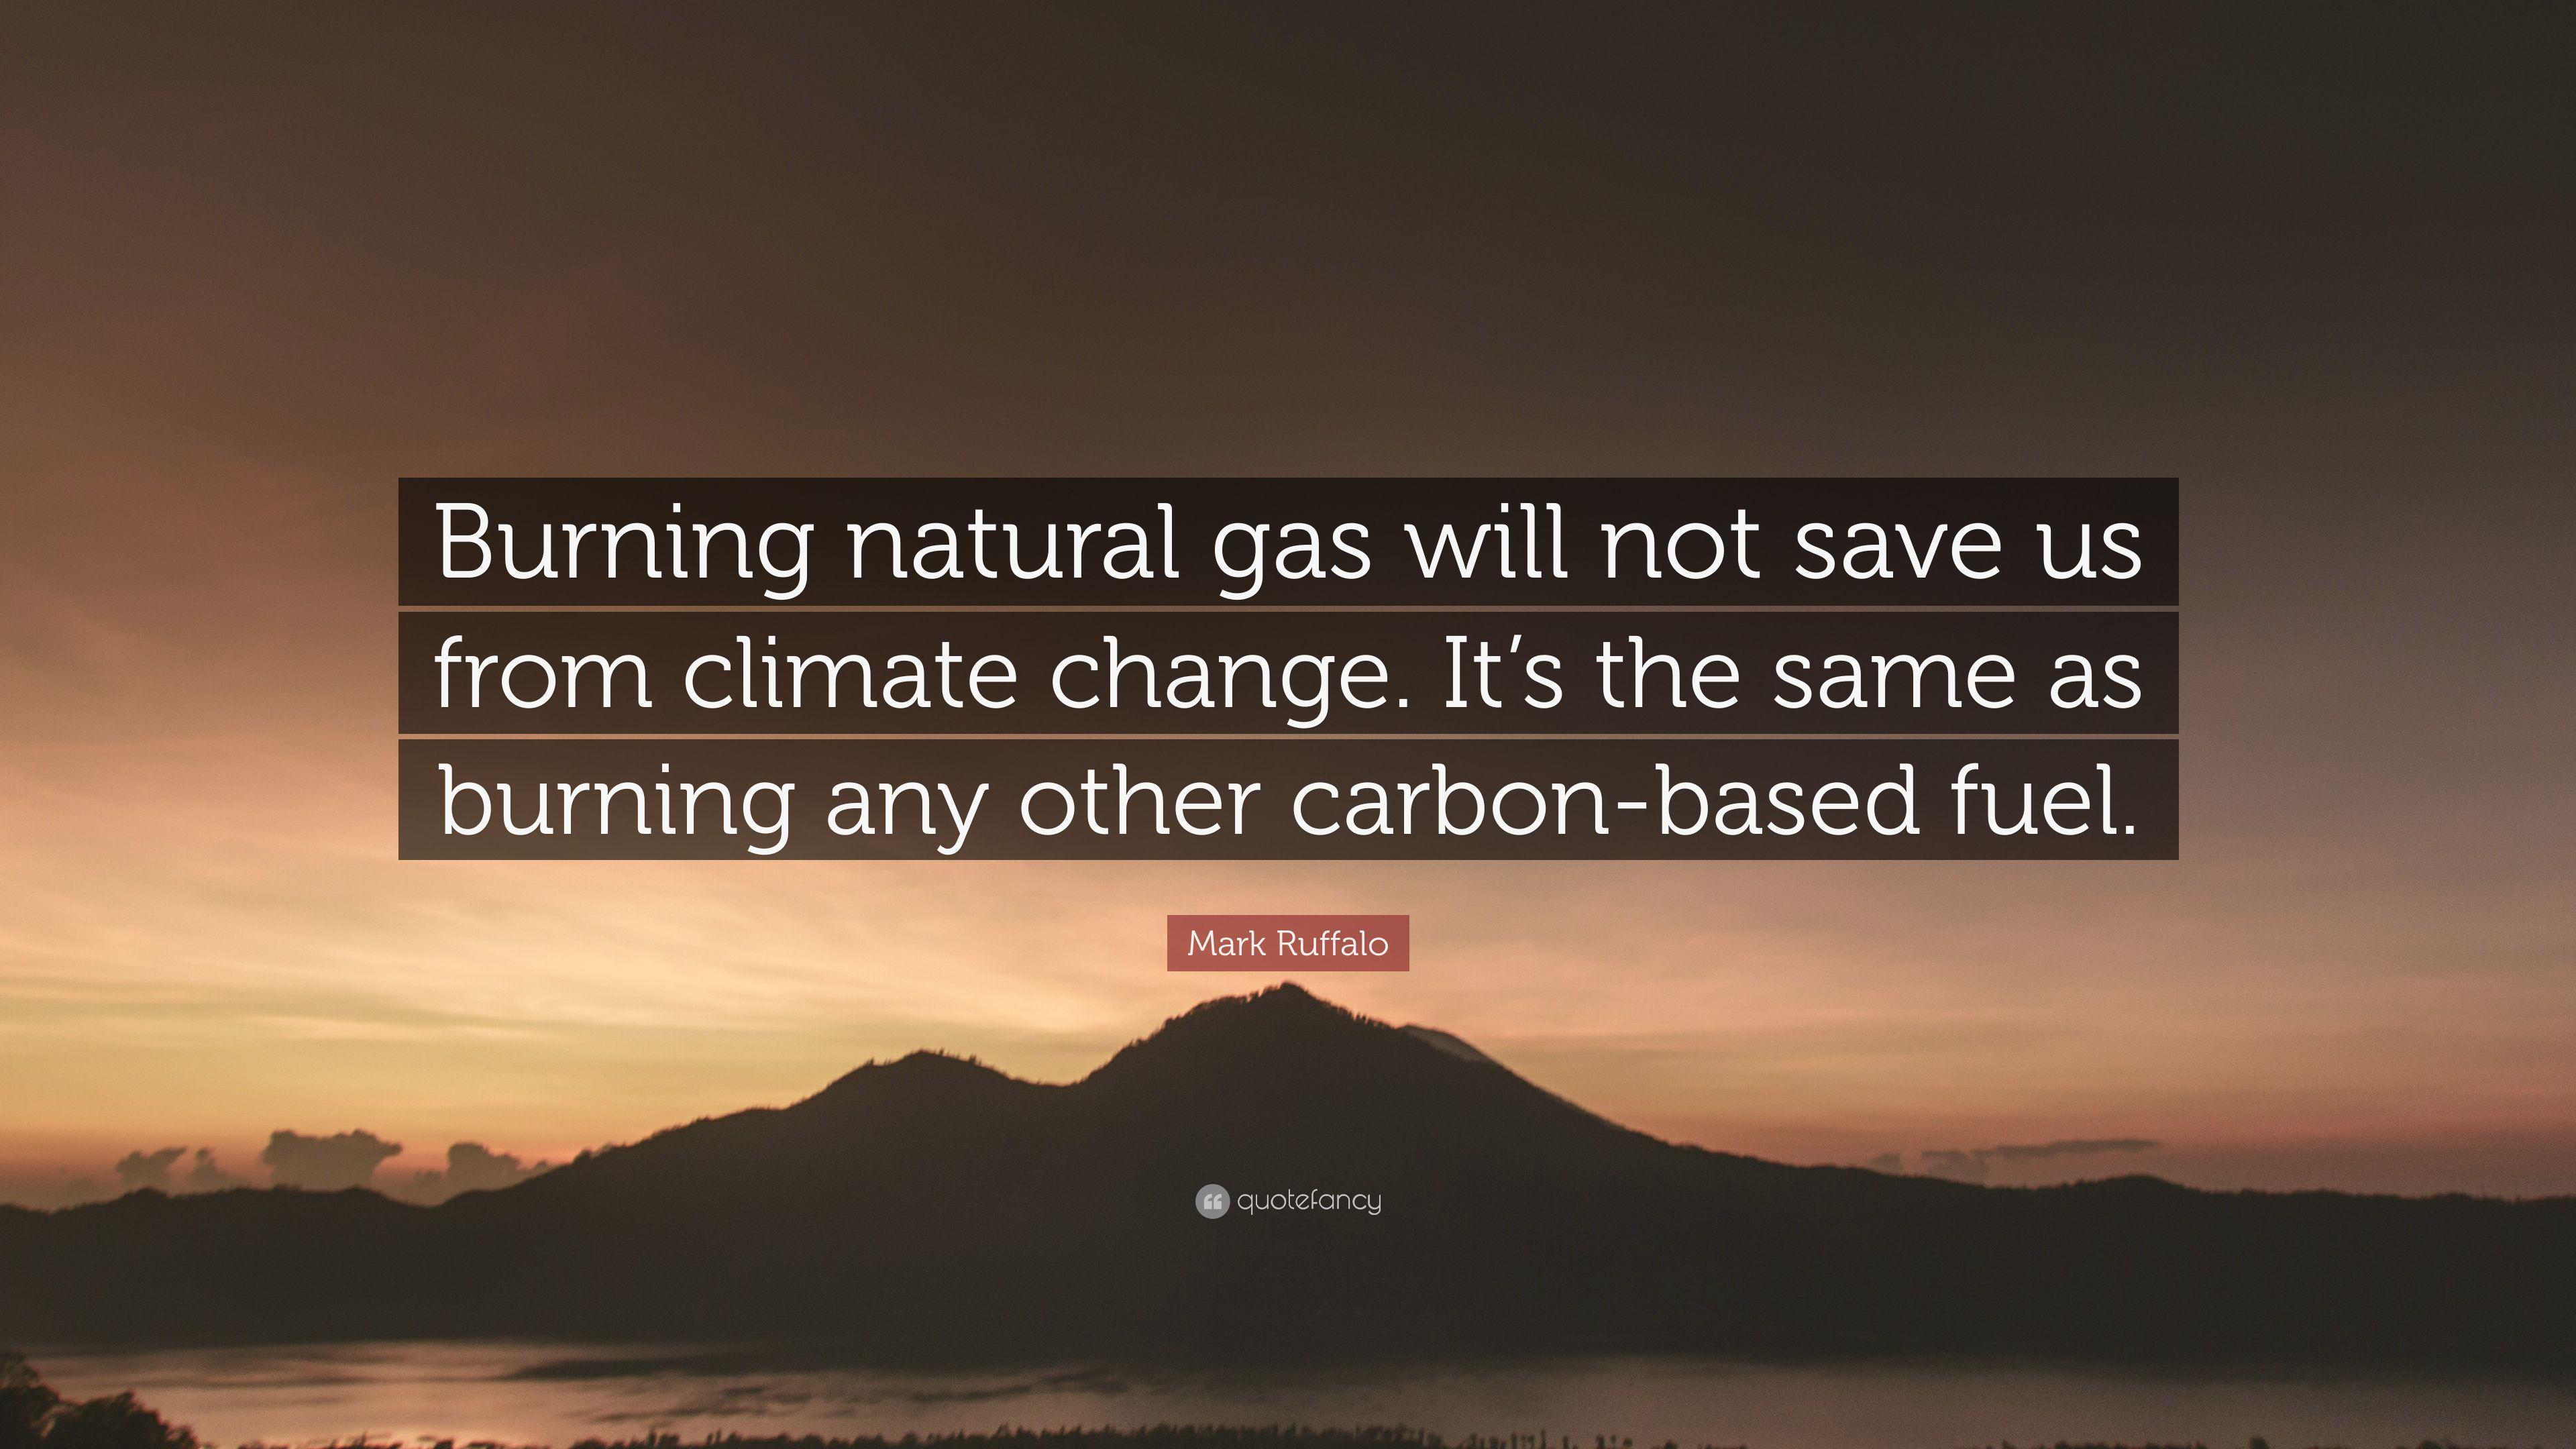 Mark Ruffalo Quote: “Burning natural gas will not save us